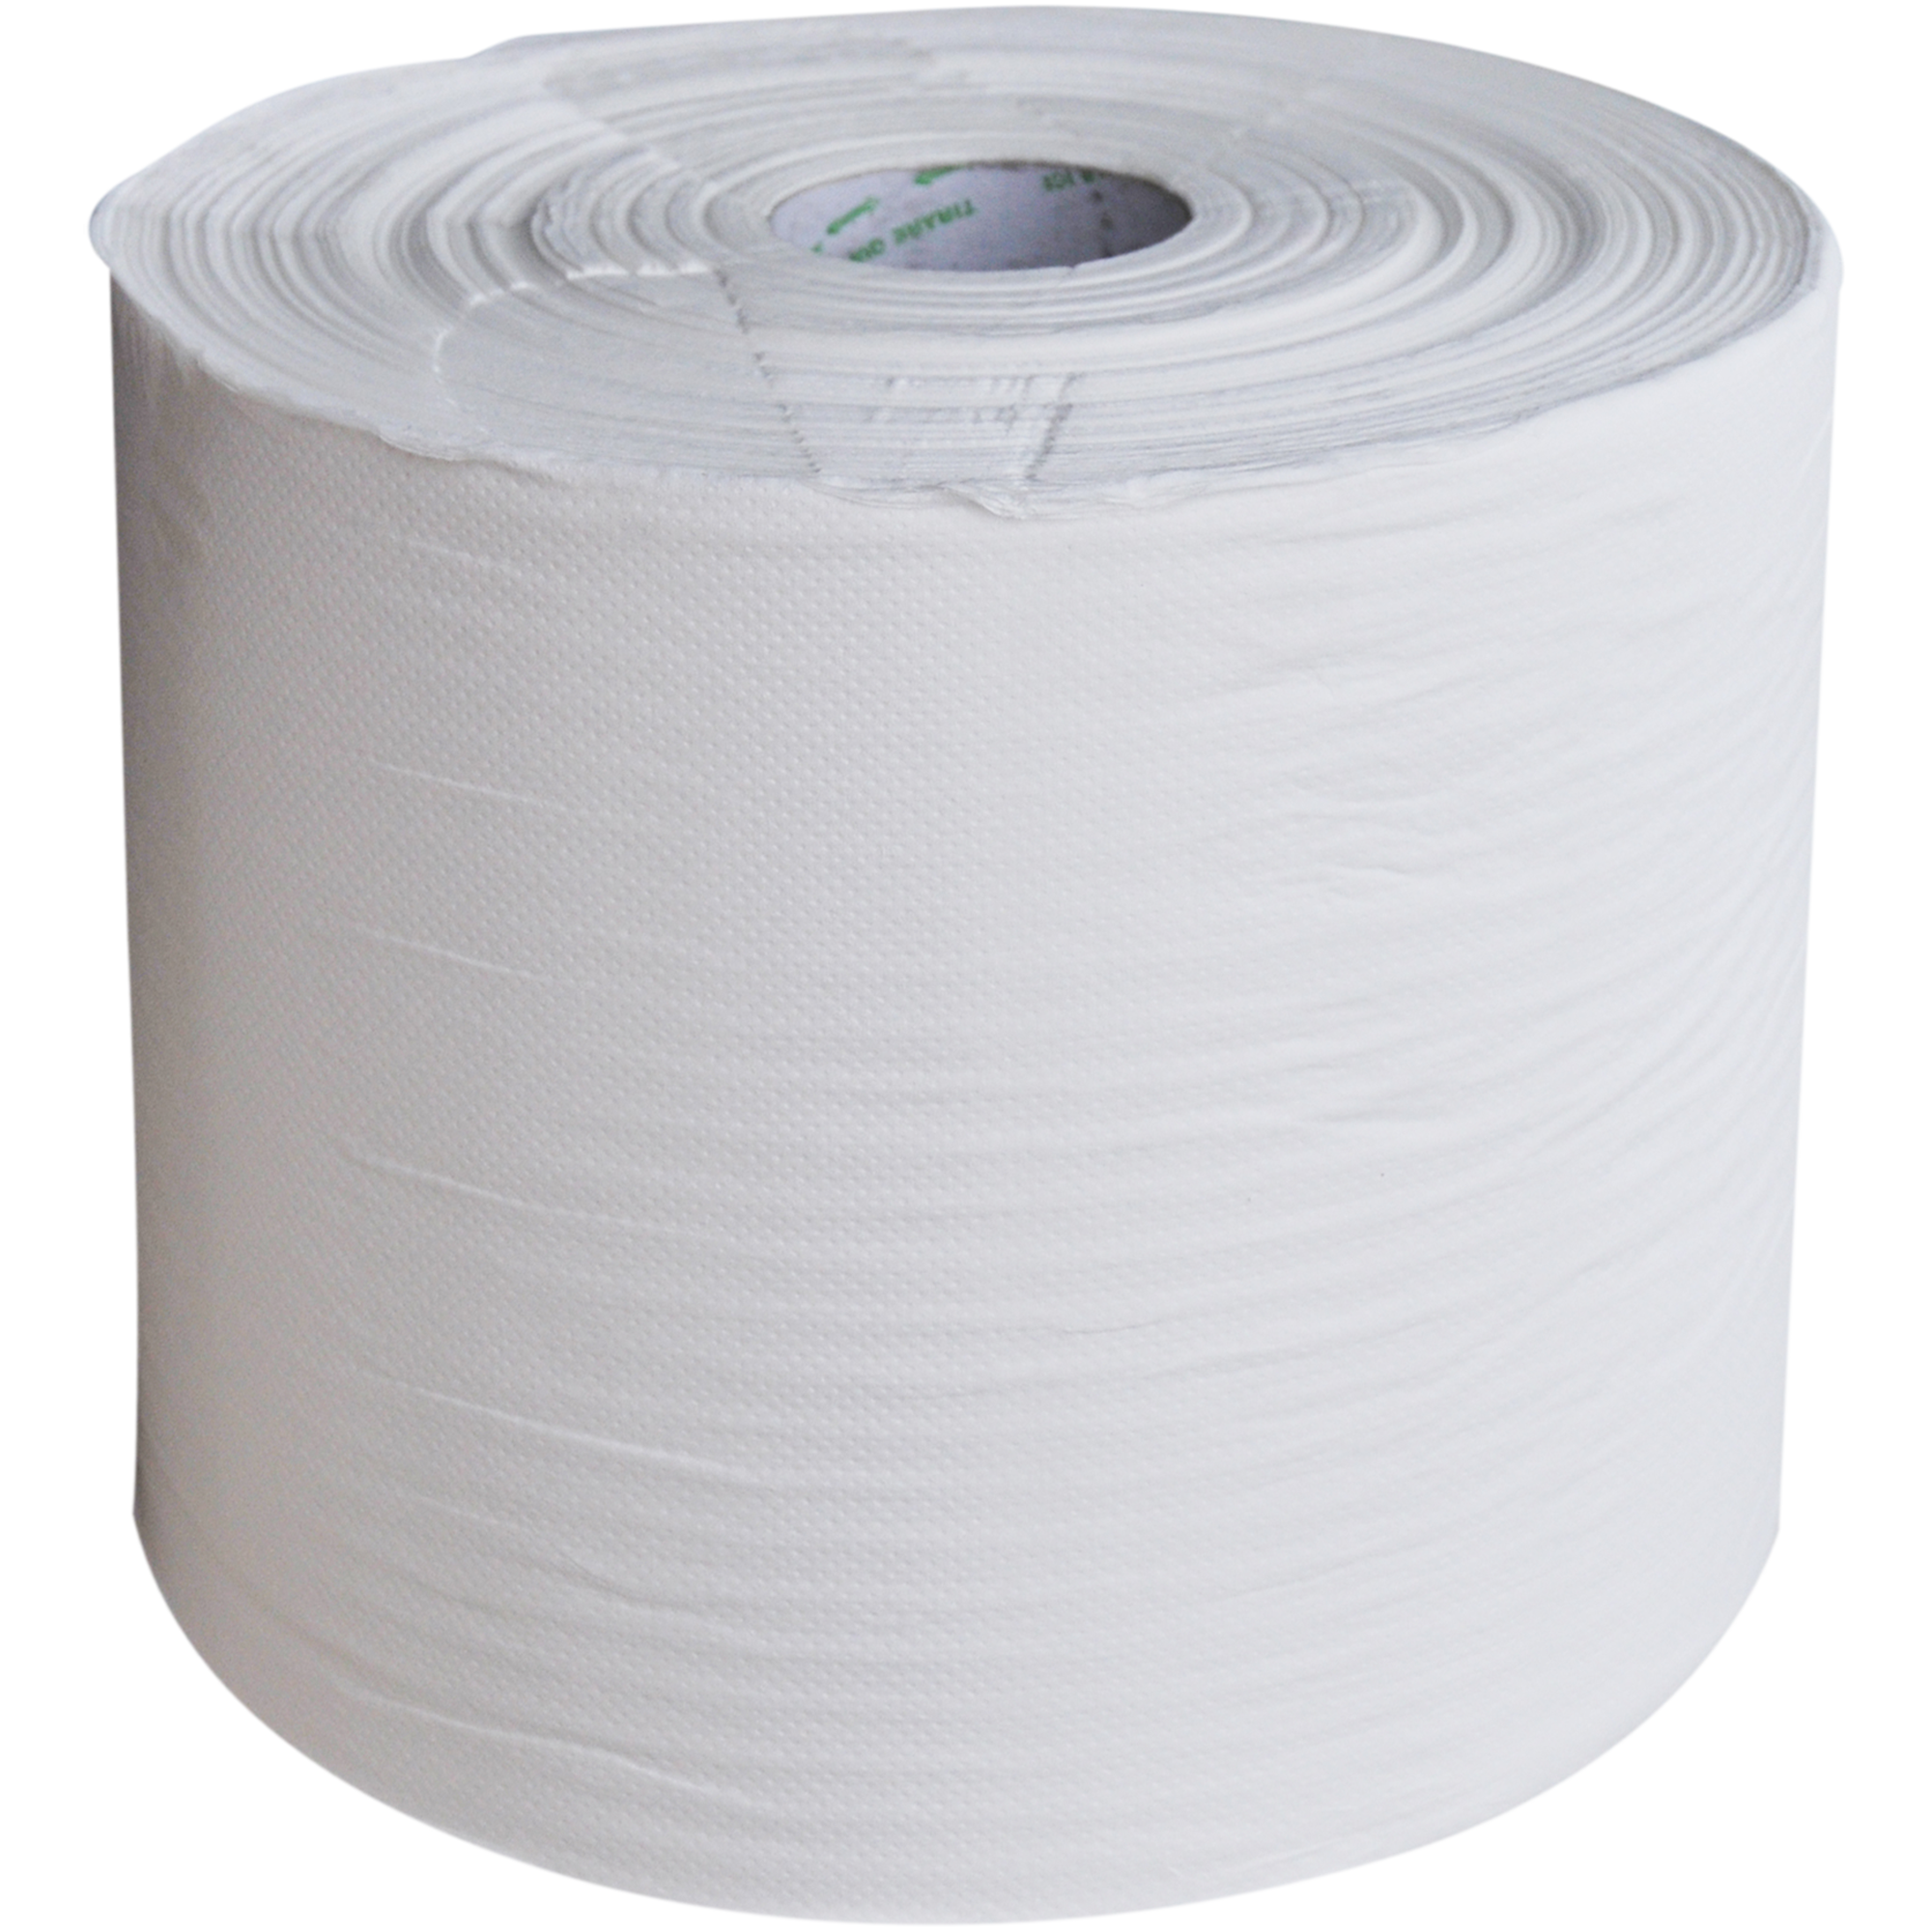 Kroon-Oil Cleaning Paper, 2 x 800 mtr